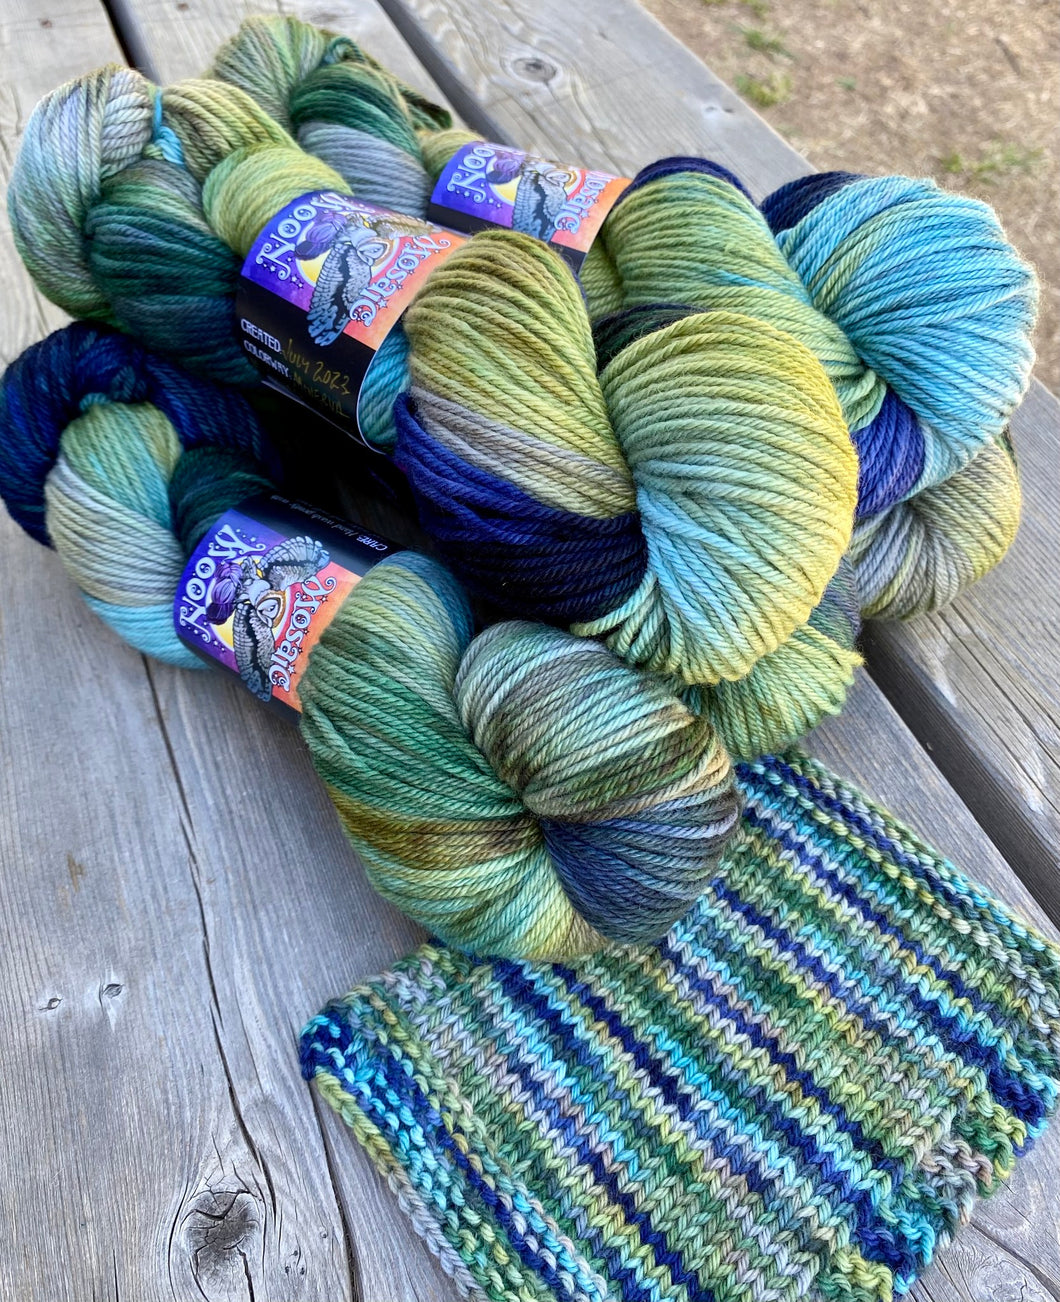 Dryad Organic Worsted - Minerva McGonagall Colorway (with added Navy)